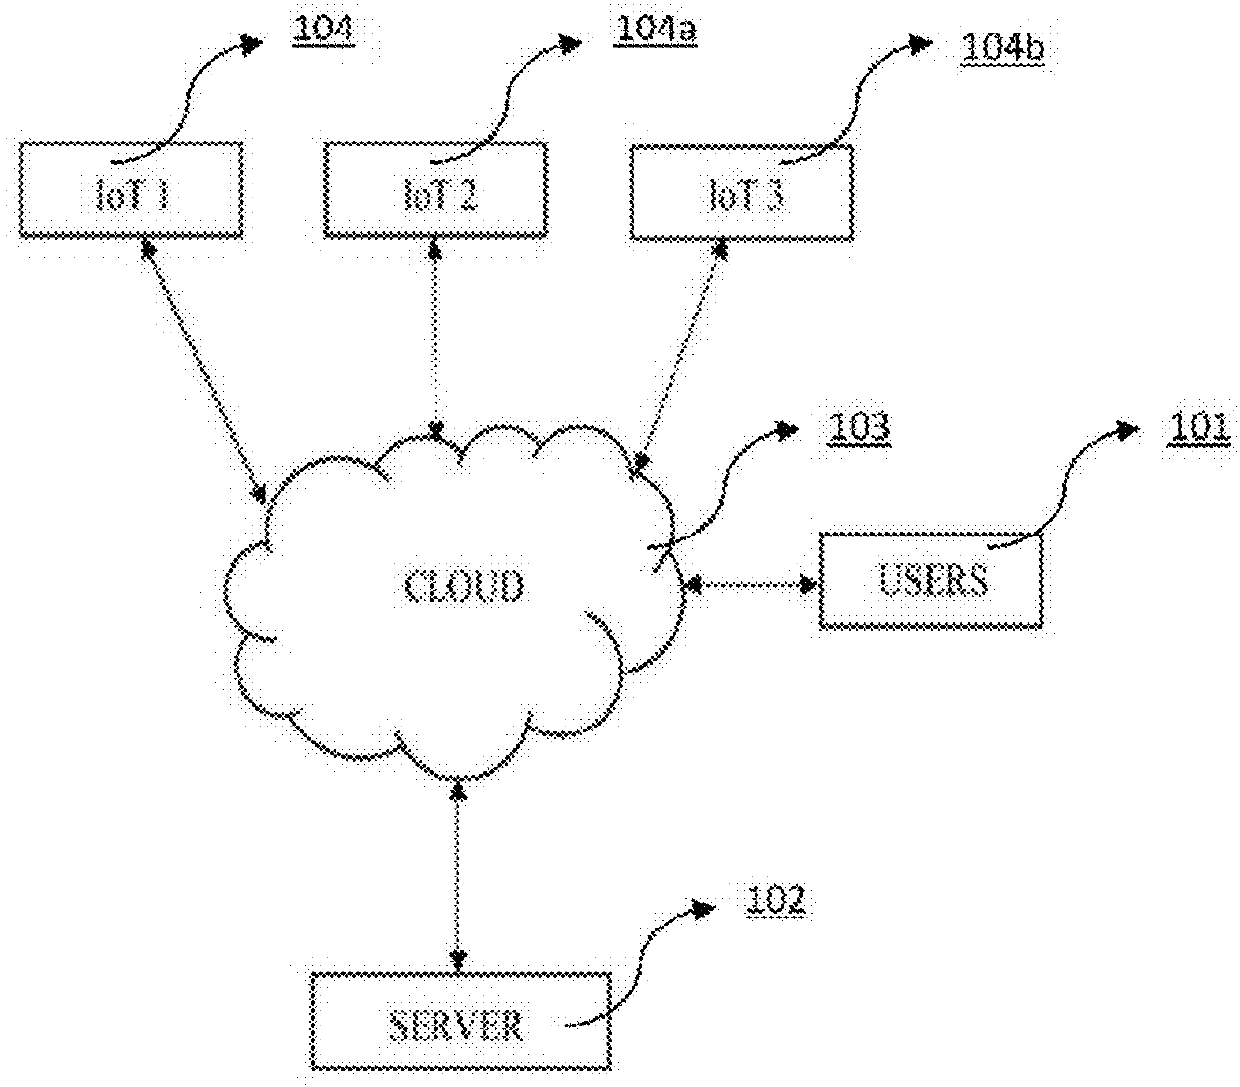 Multi-Level User Device Authentication System for Internet of Things (IOT)